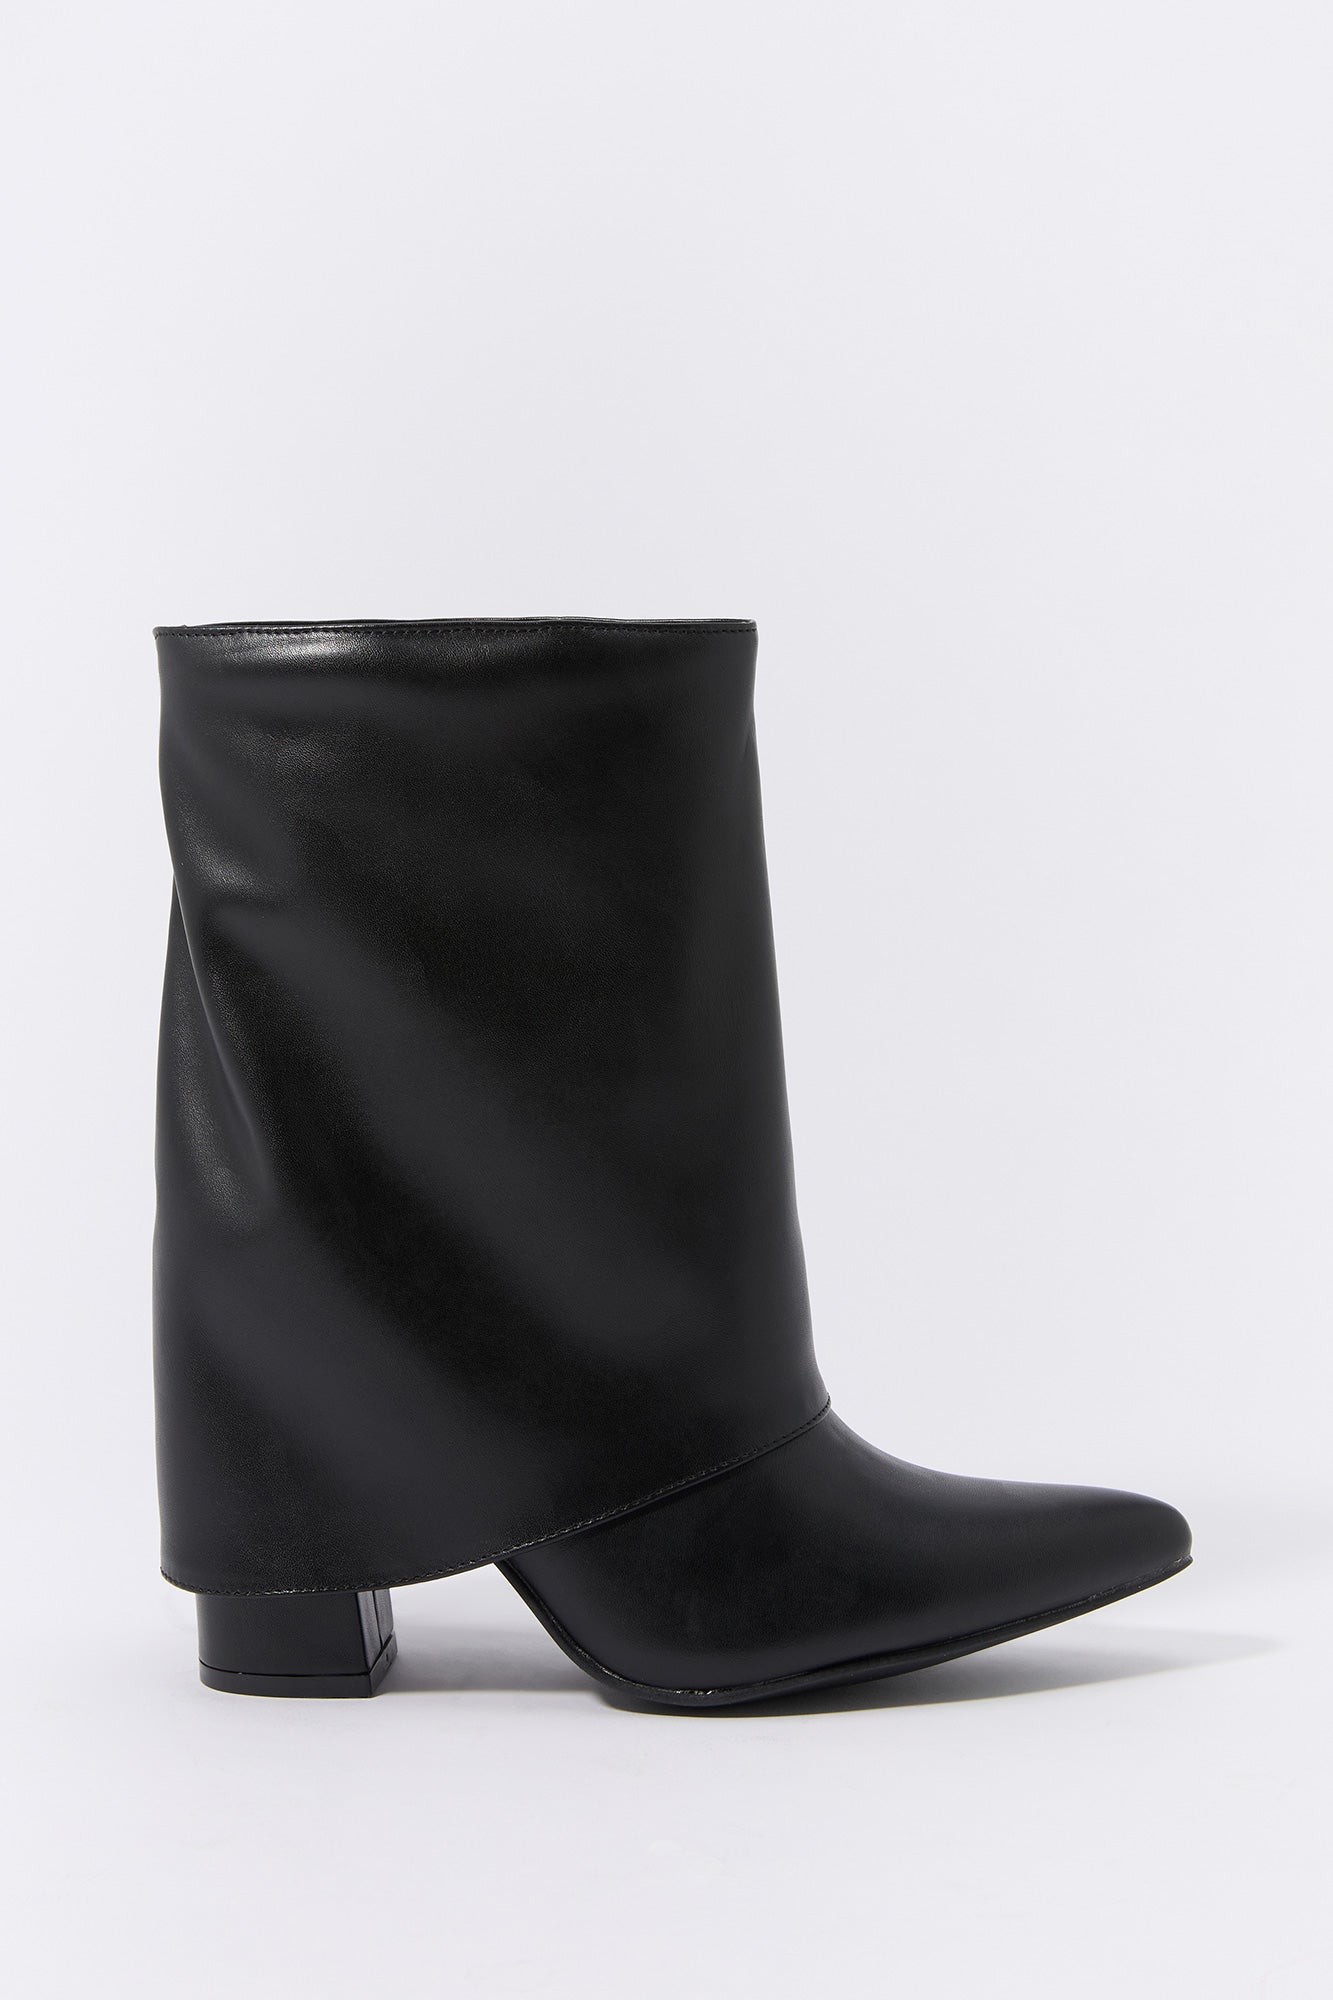 Faux Leather Foldover Shaft Boot